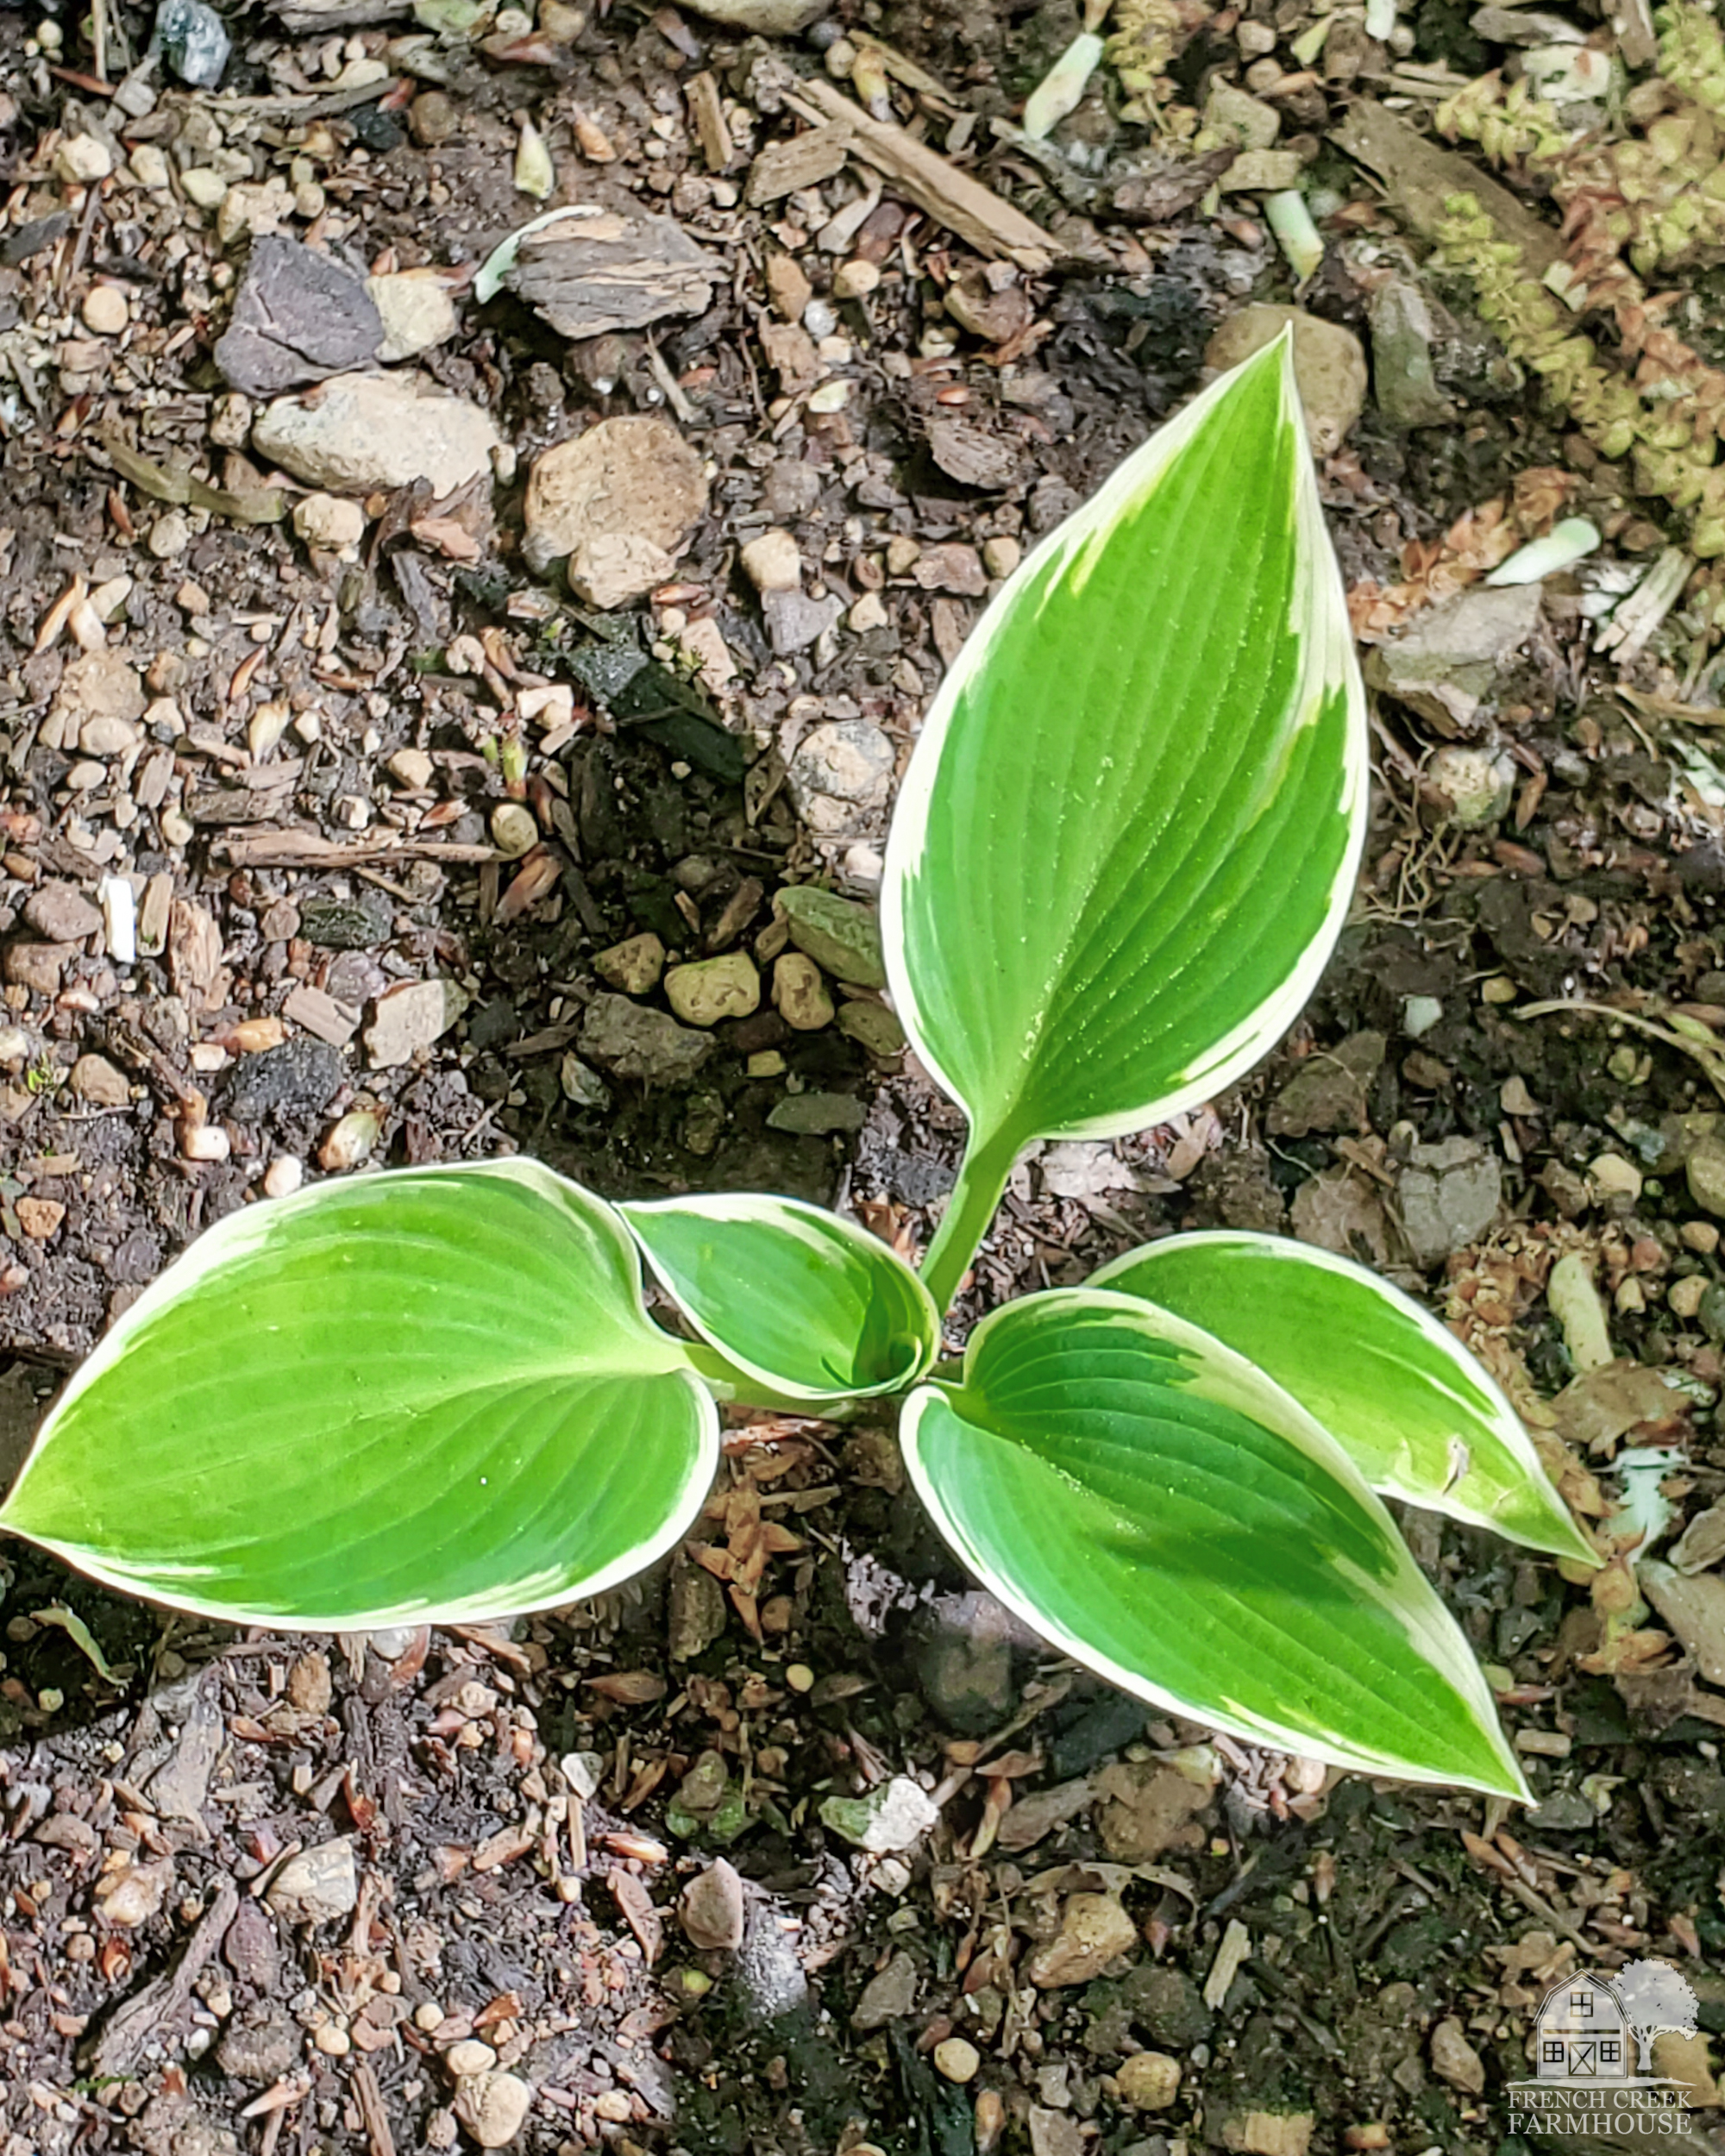 The variegated leaves of the hosta on display